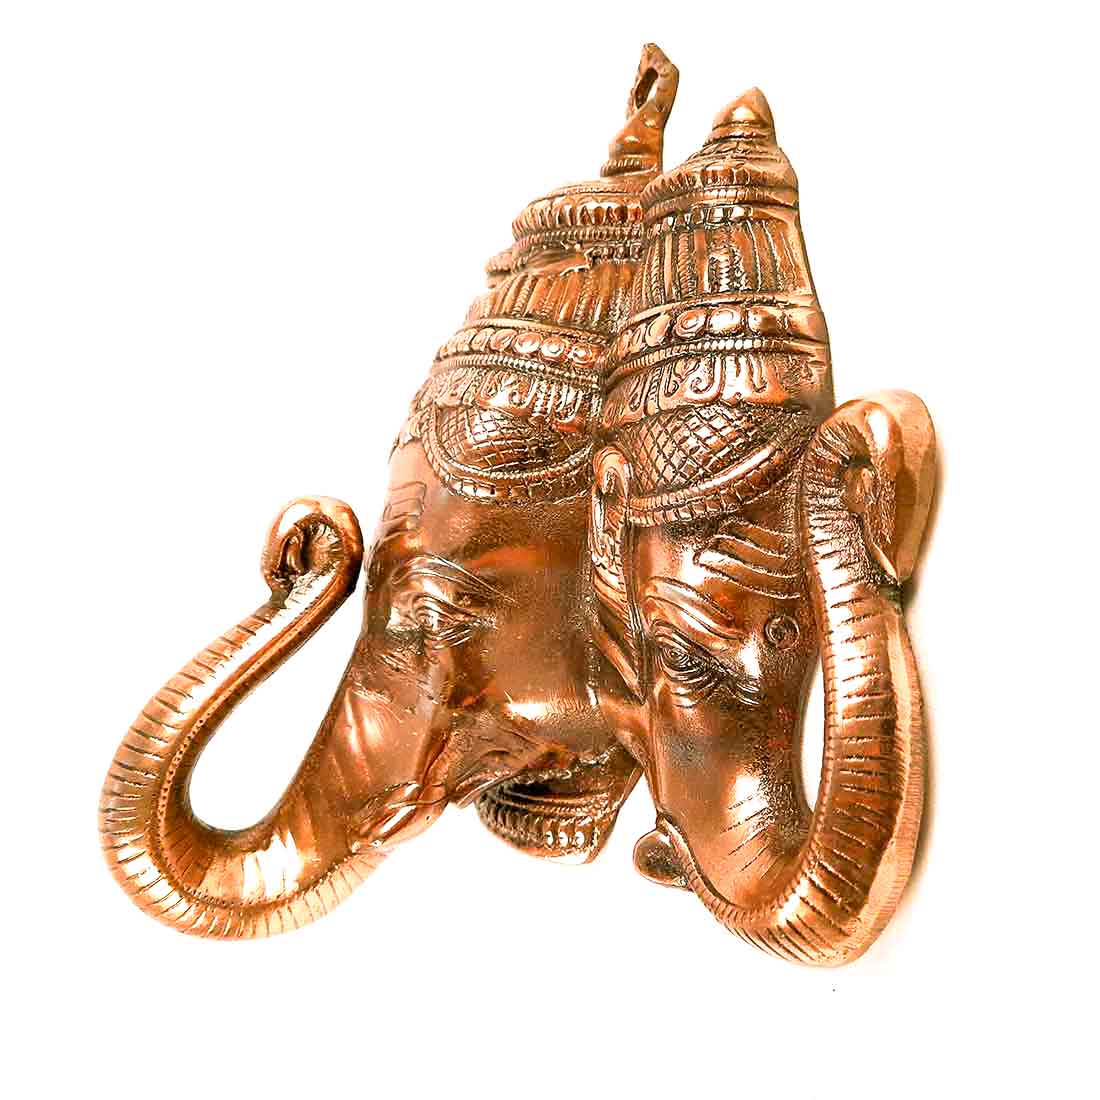 Ganesh Wall Hanging| Handcrafted 3 Face Ganesha Wall Art & Hangings for Gifts & Home Decor| Spiritual Sculpture and Religious Wall Mount Artwork | 16 Inch